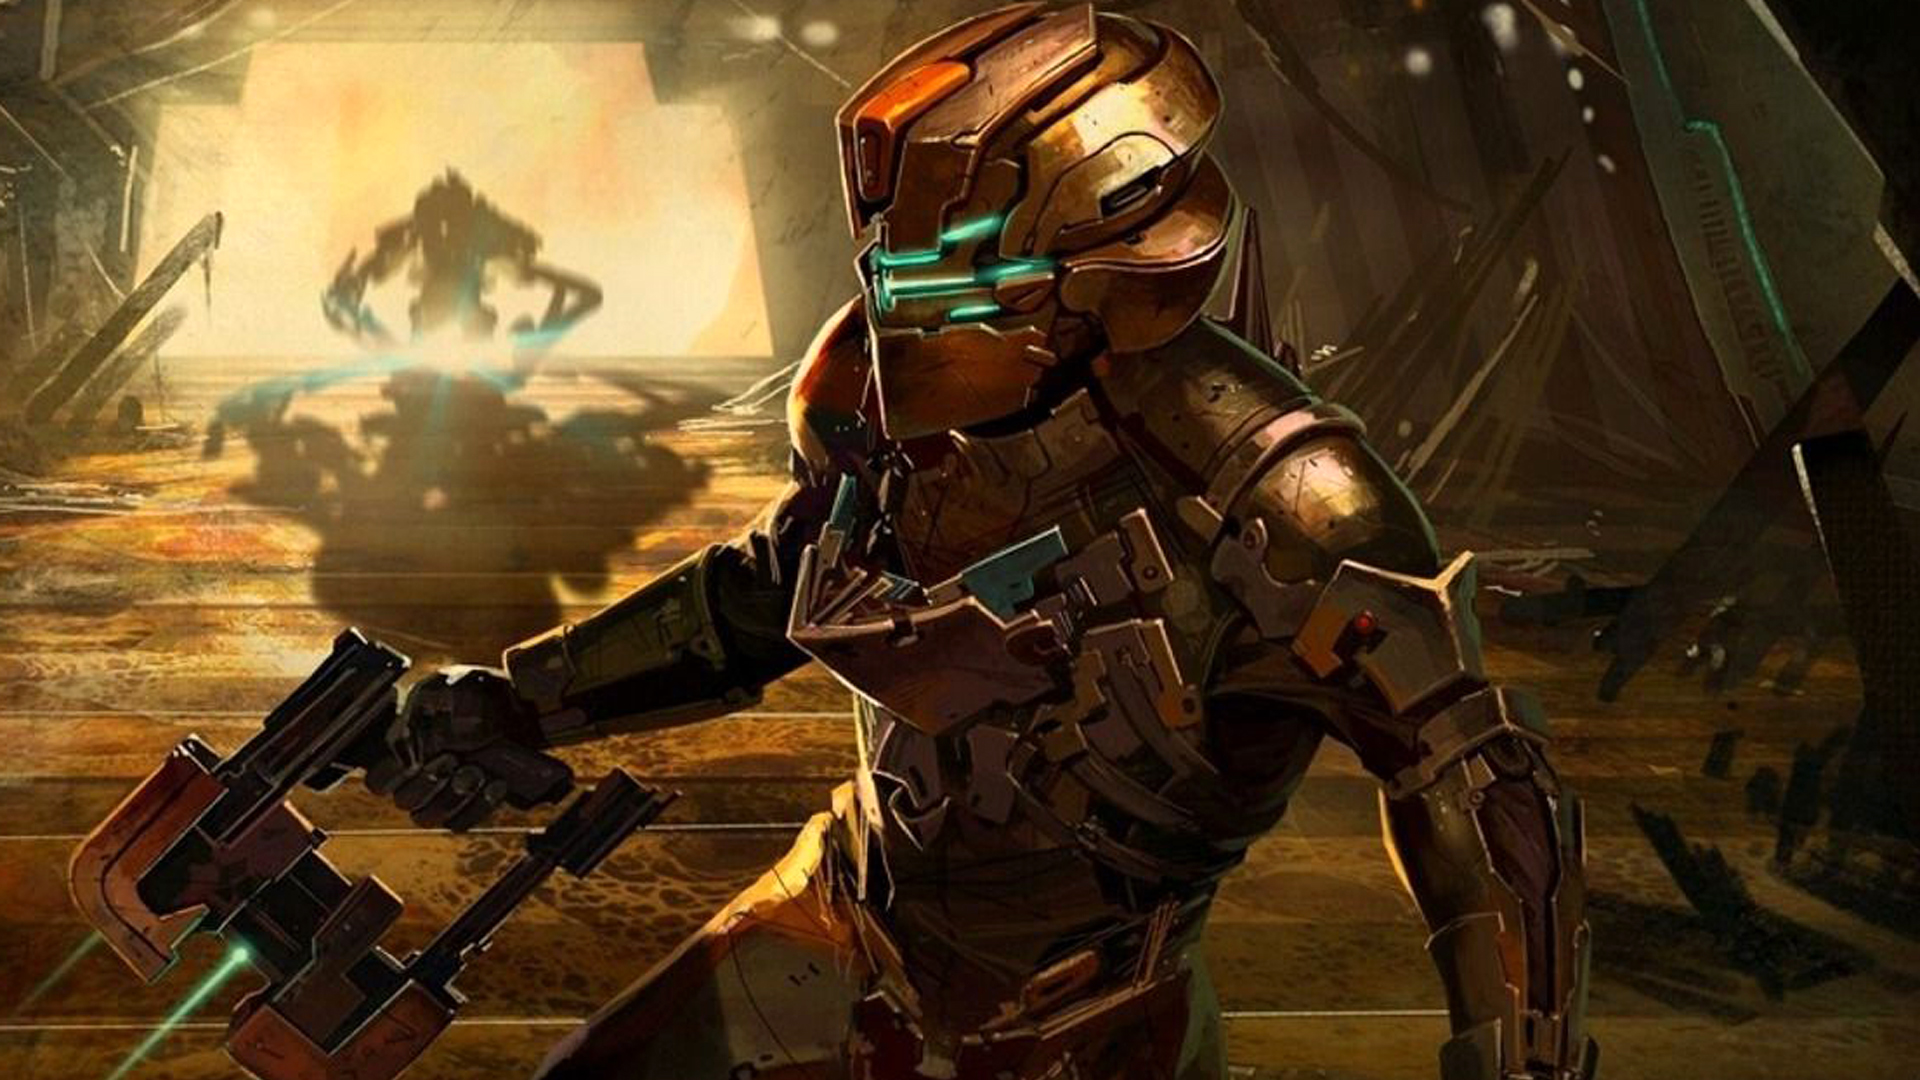 Report: Dead Space is aiming for a release of late 2022 at the earliest